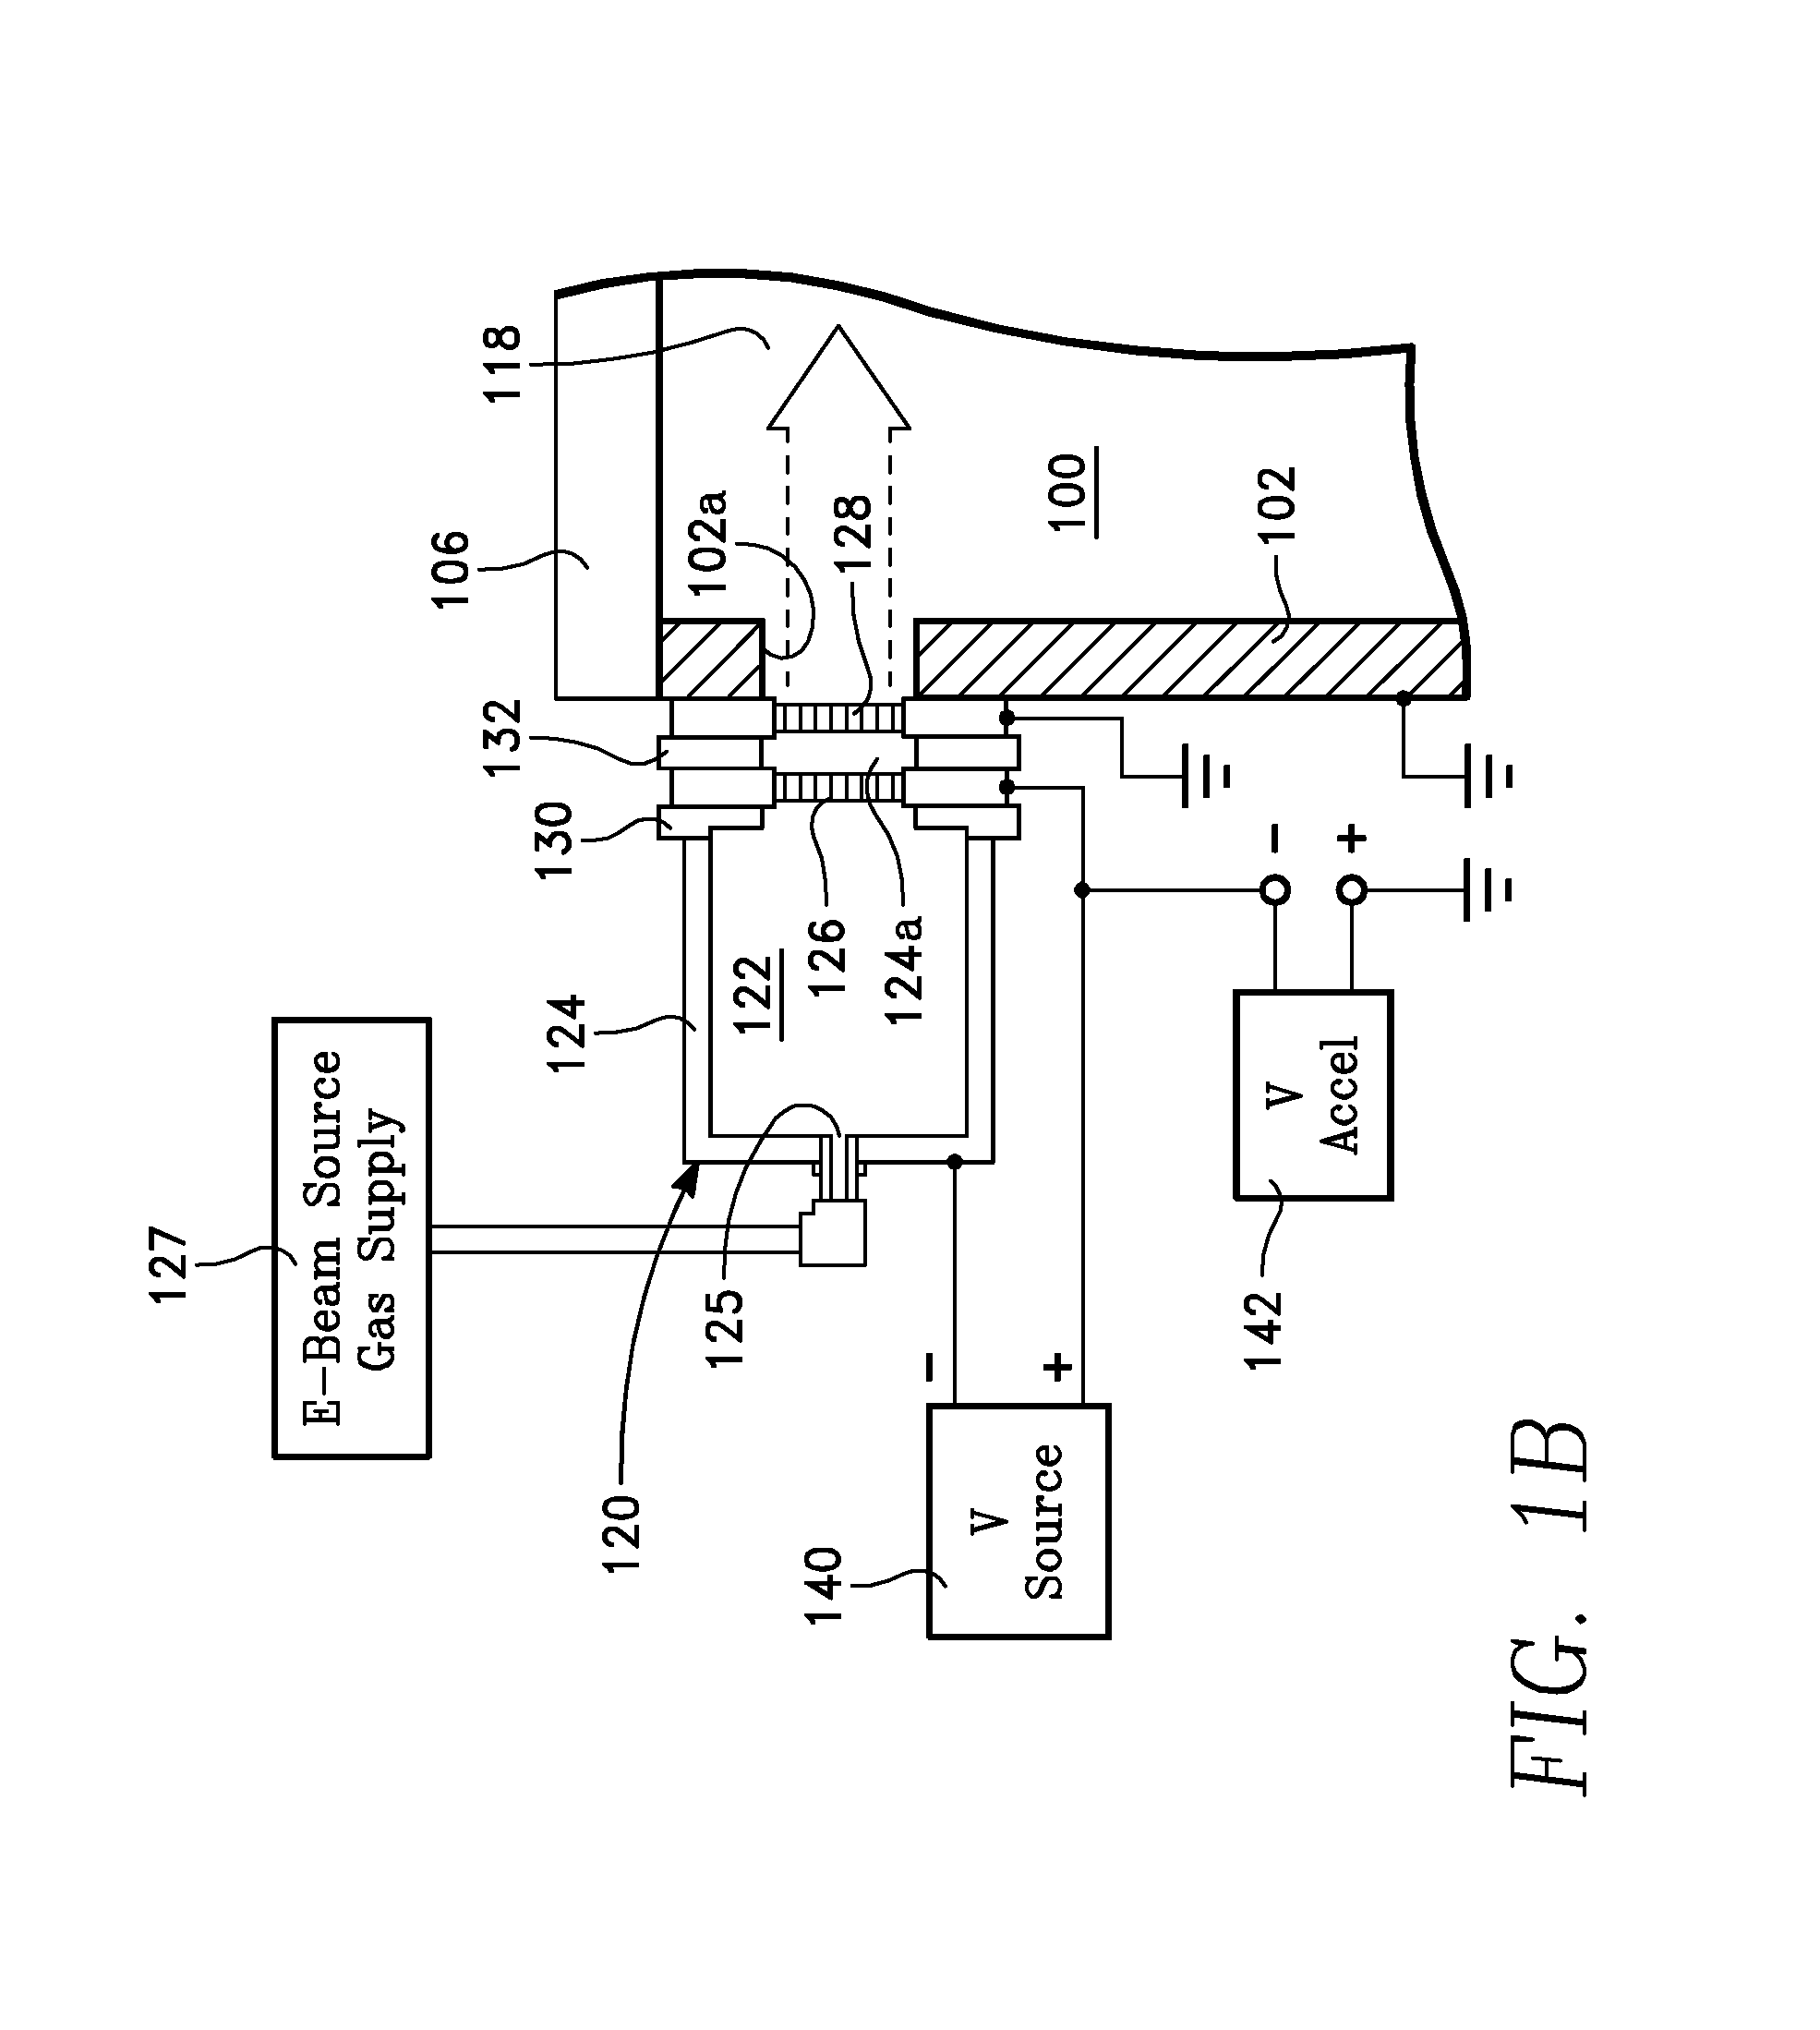 Electron beam plasma source with remote radical source